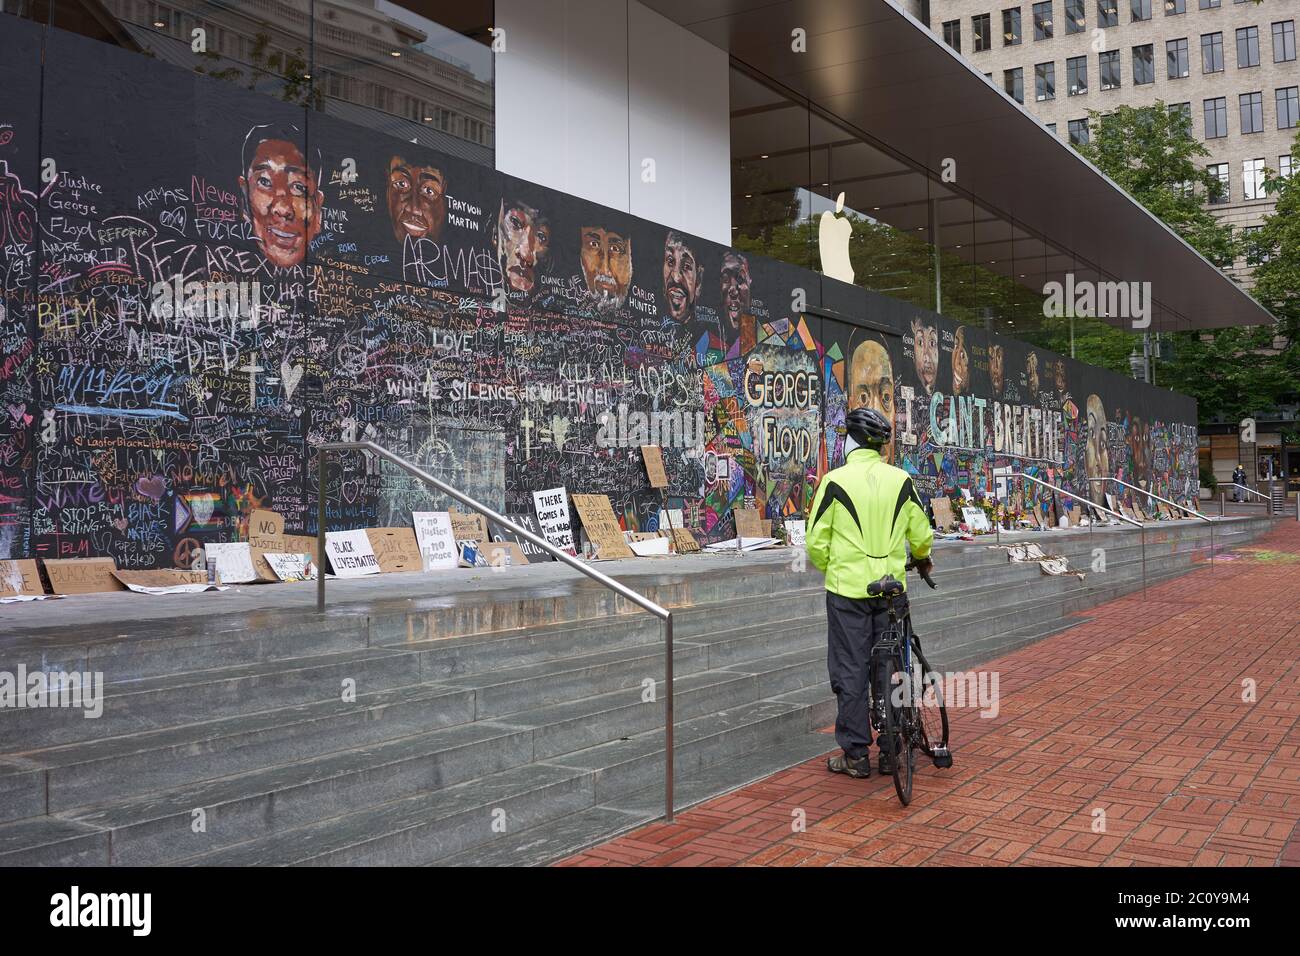 The boarded-up Apple Store in downtown Portland's Pioneer Place, which has become unofficial canvases for peaceful protest, seen on Friday, 6/12/2020. Stock Photo